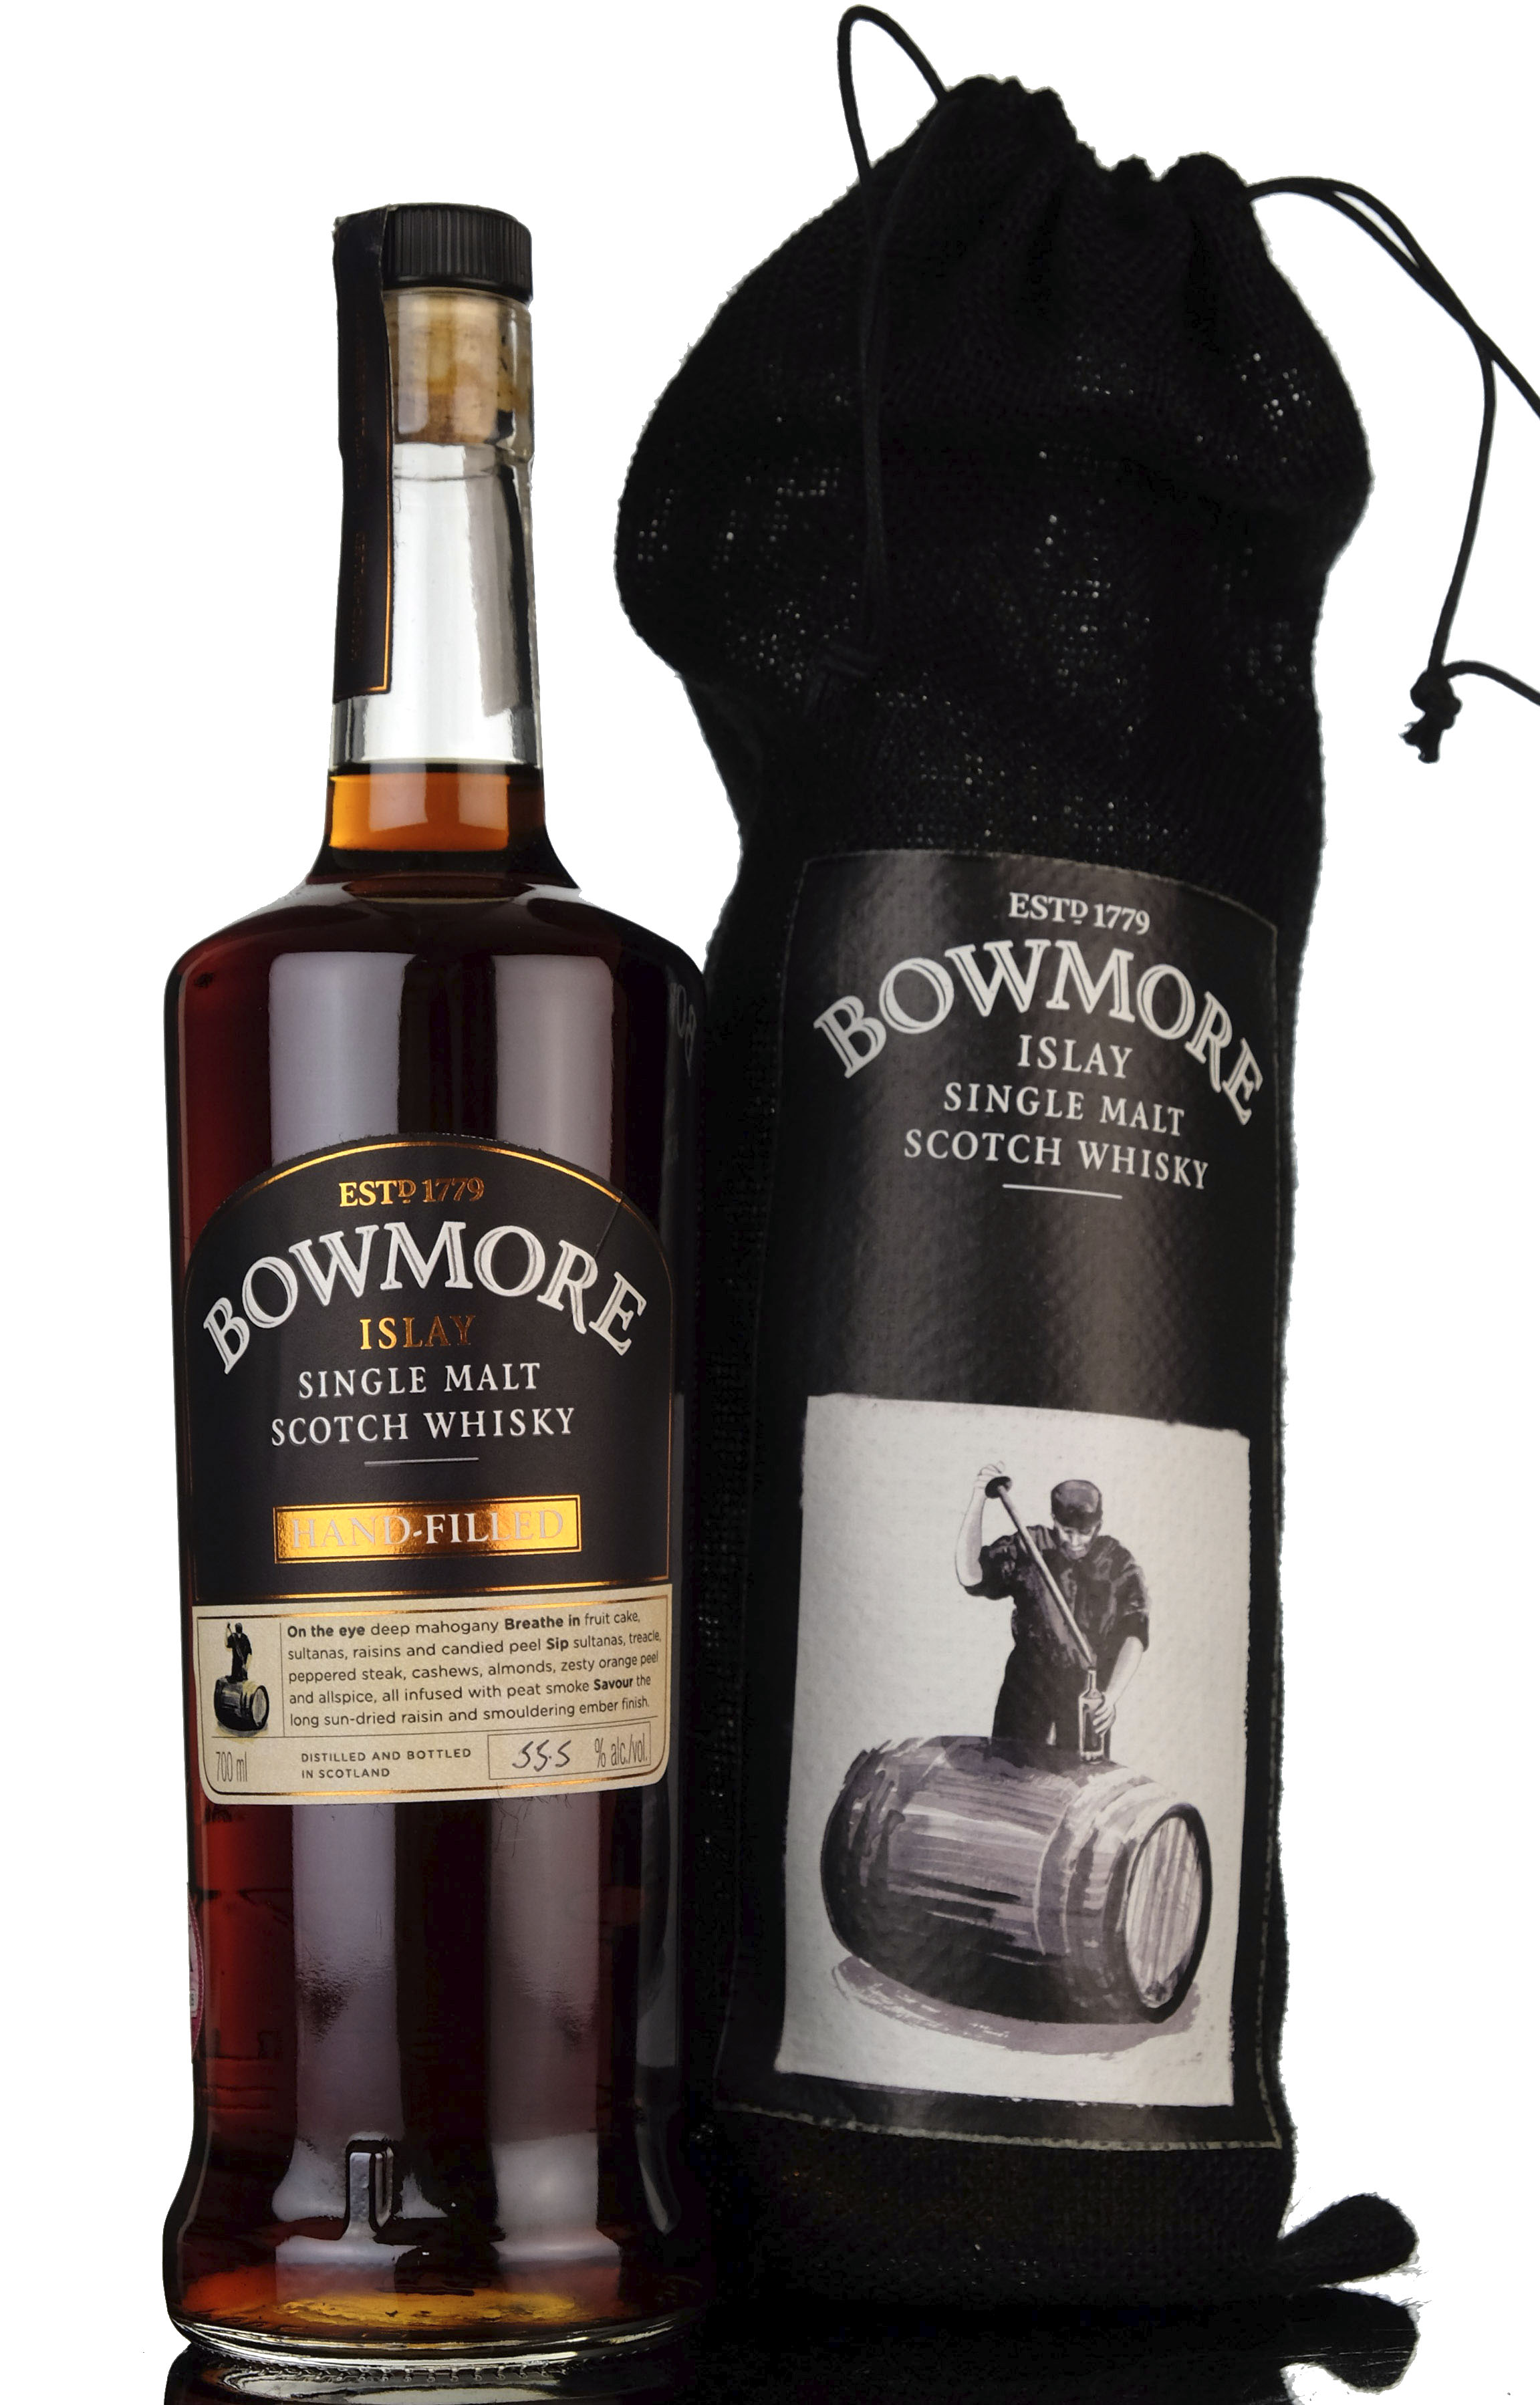 Bowmore 1997-2013 - Hand Filled - Cask 23